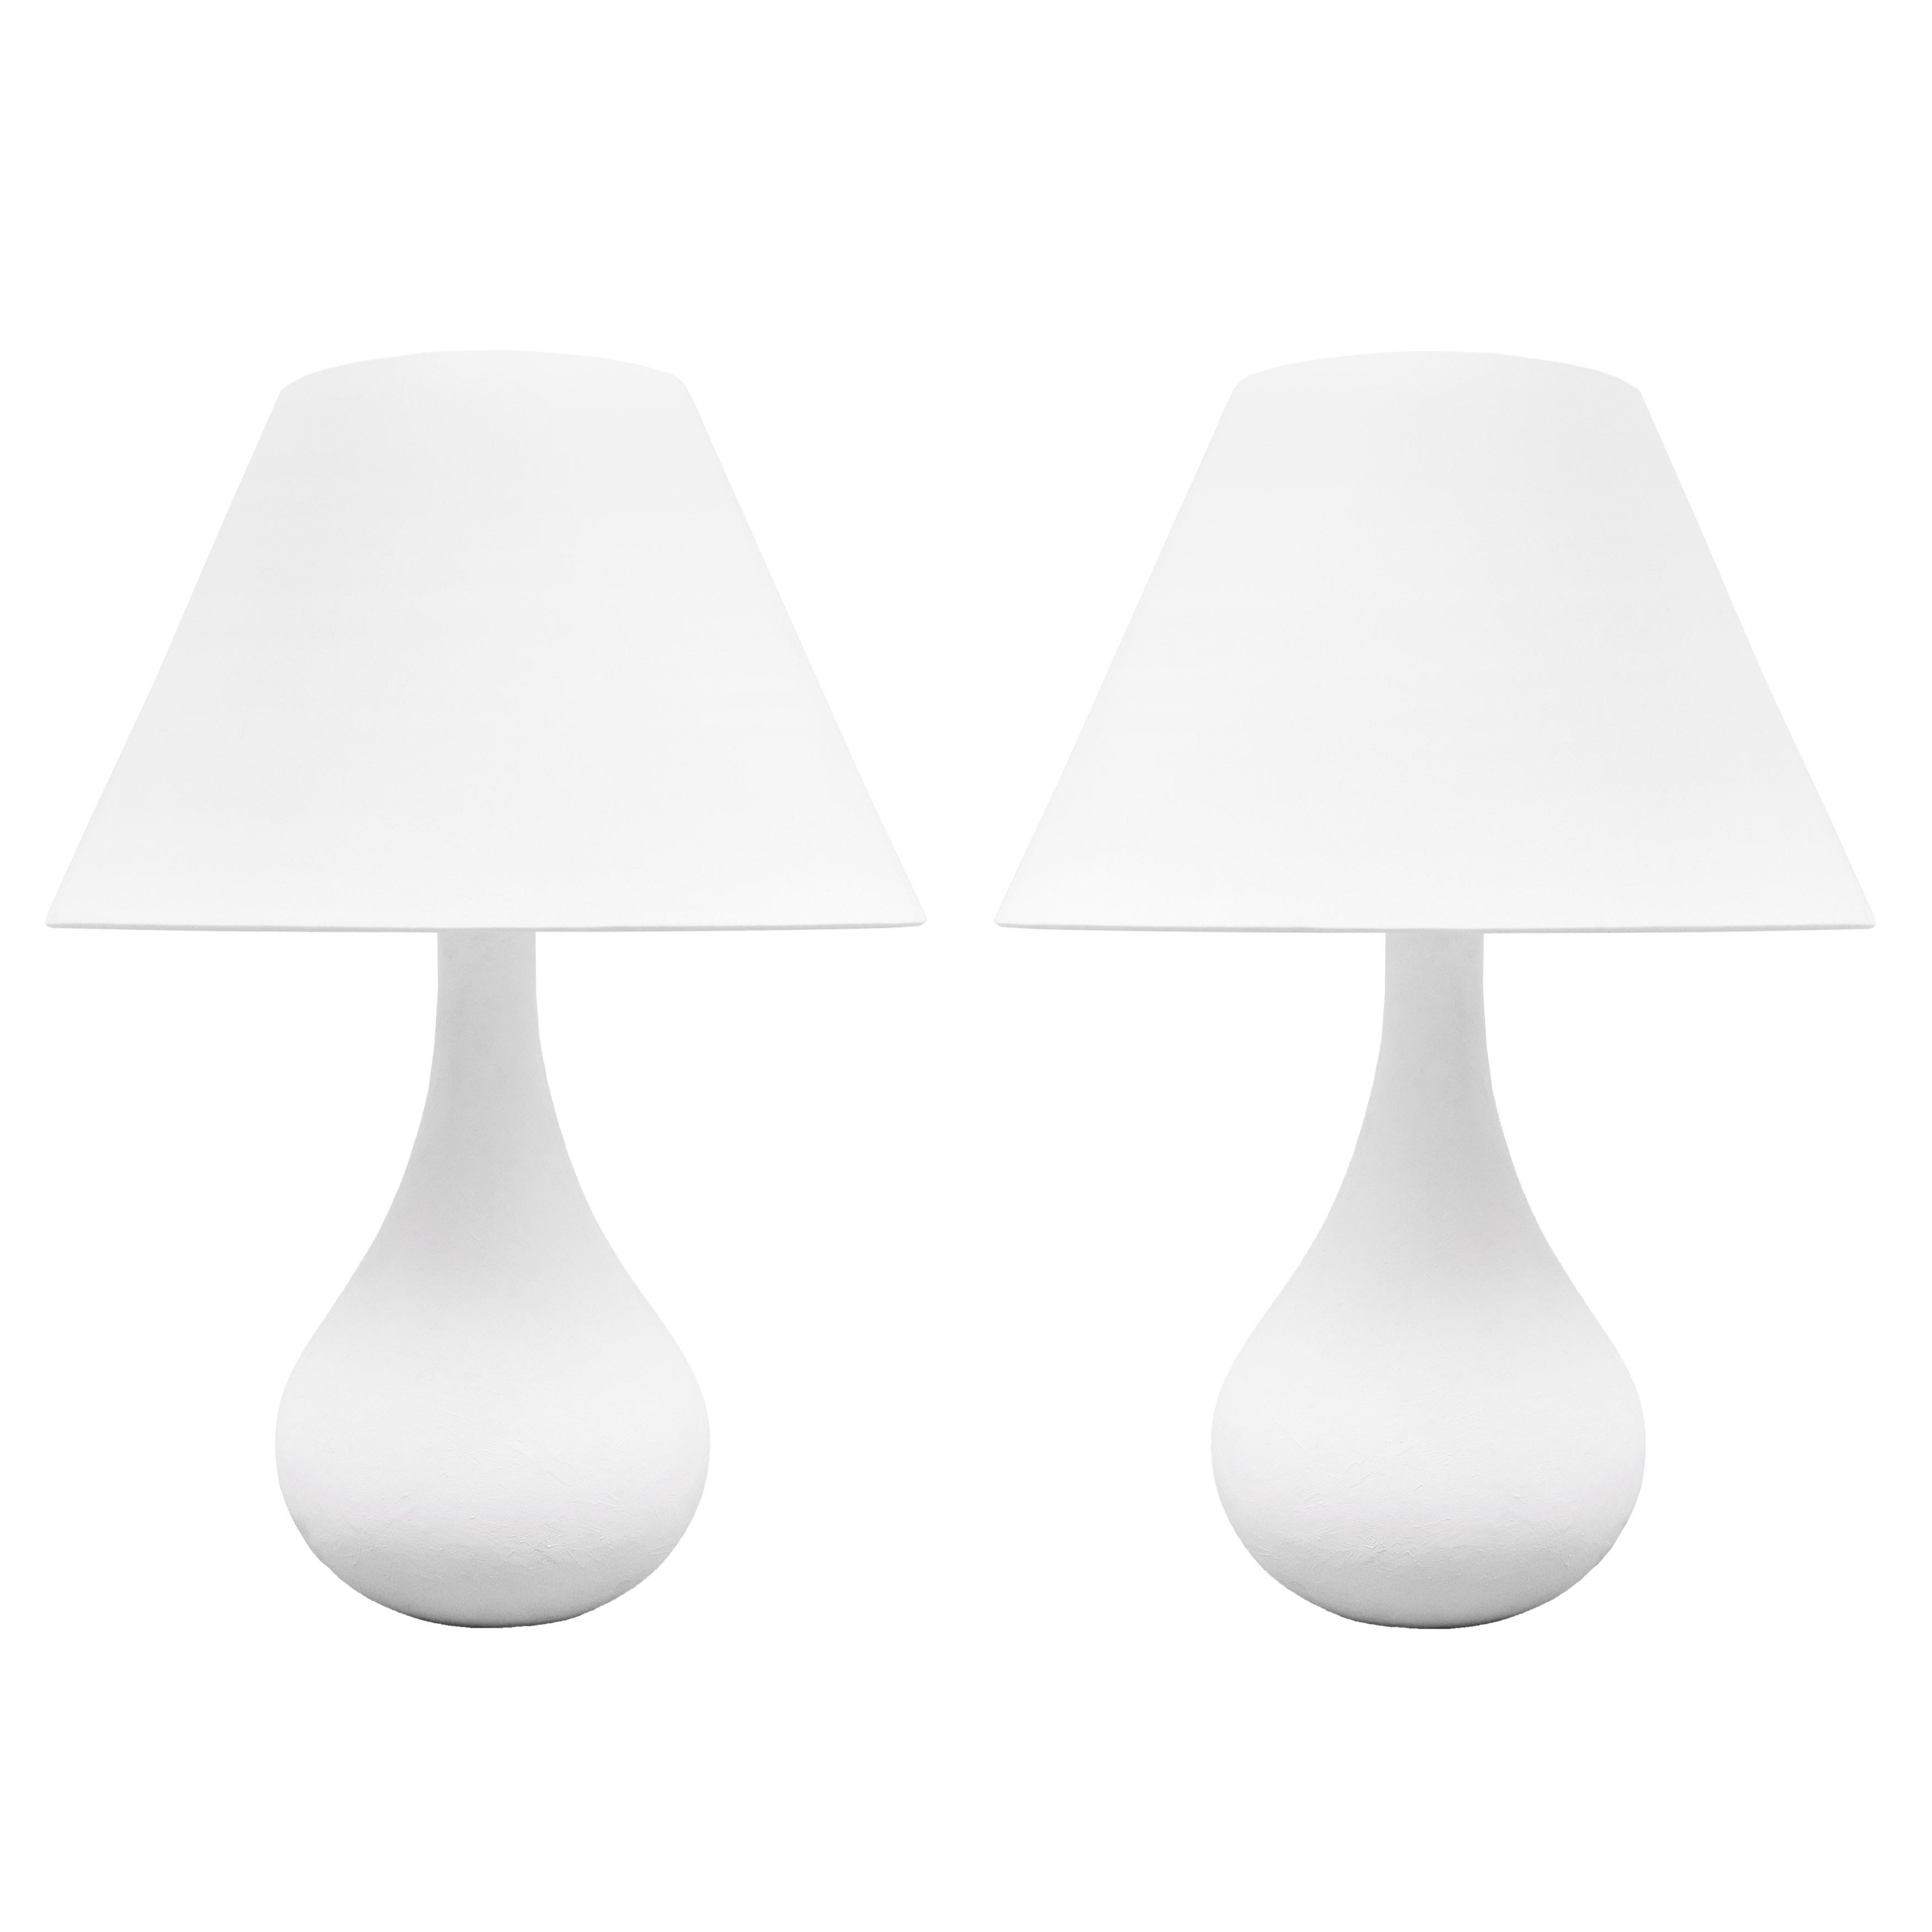 Pair of Plaster Custom Elle Lamps.
One pair currently in stock. Lampshades are not included. 
Please note that these lamps are customizable in size, color, material.
Lead time is 8-10 weeks.
Measures: height to tip of finial is 27.5